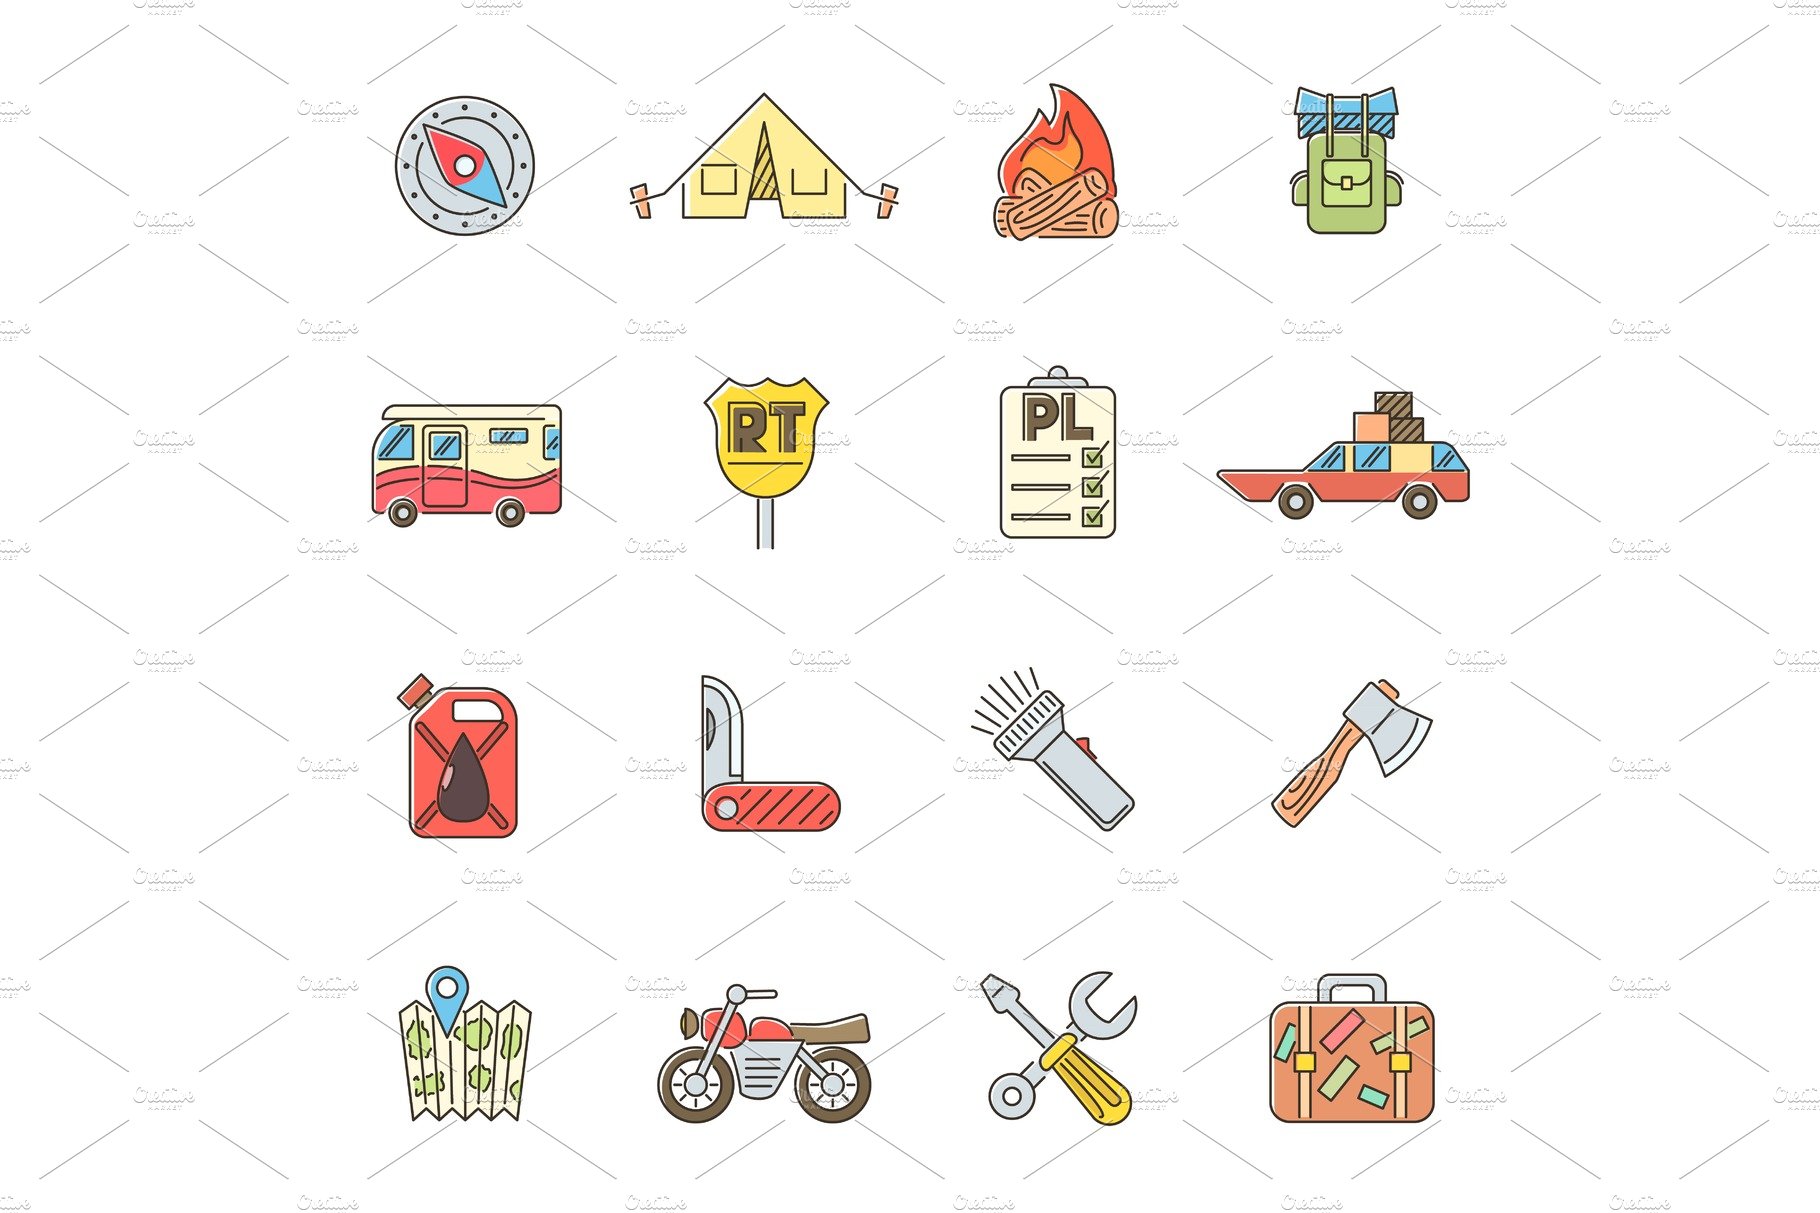 Travel icons set, flat outline style cover image.